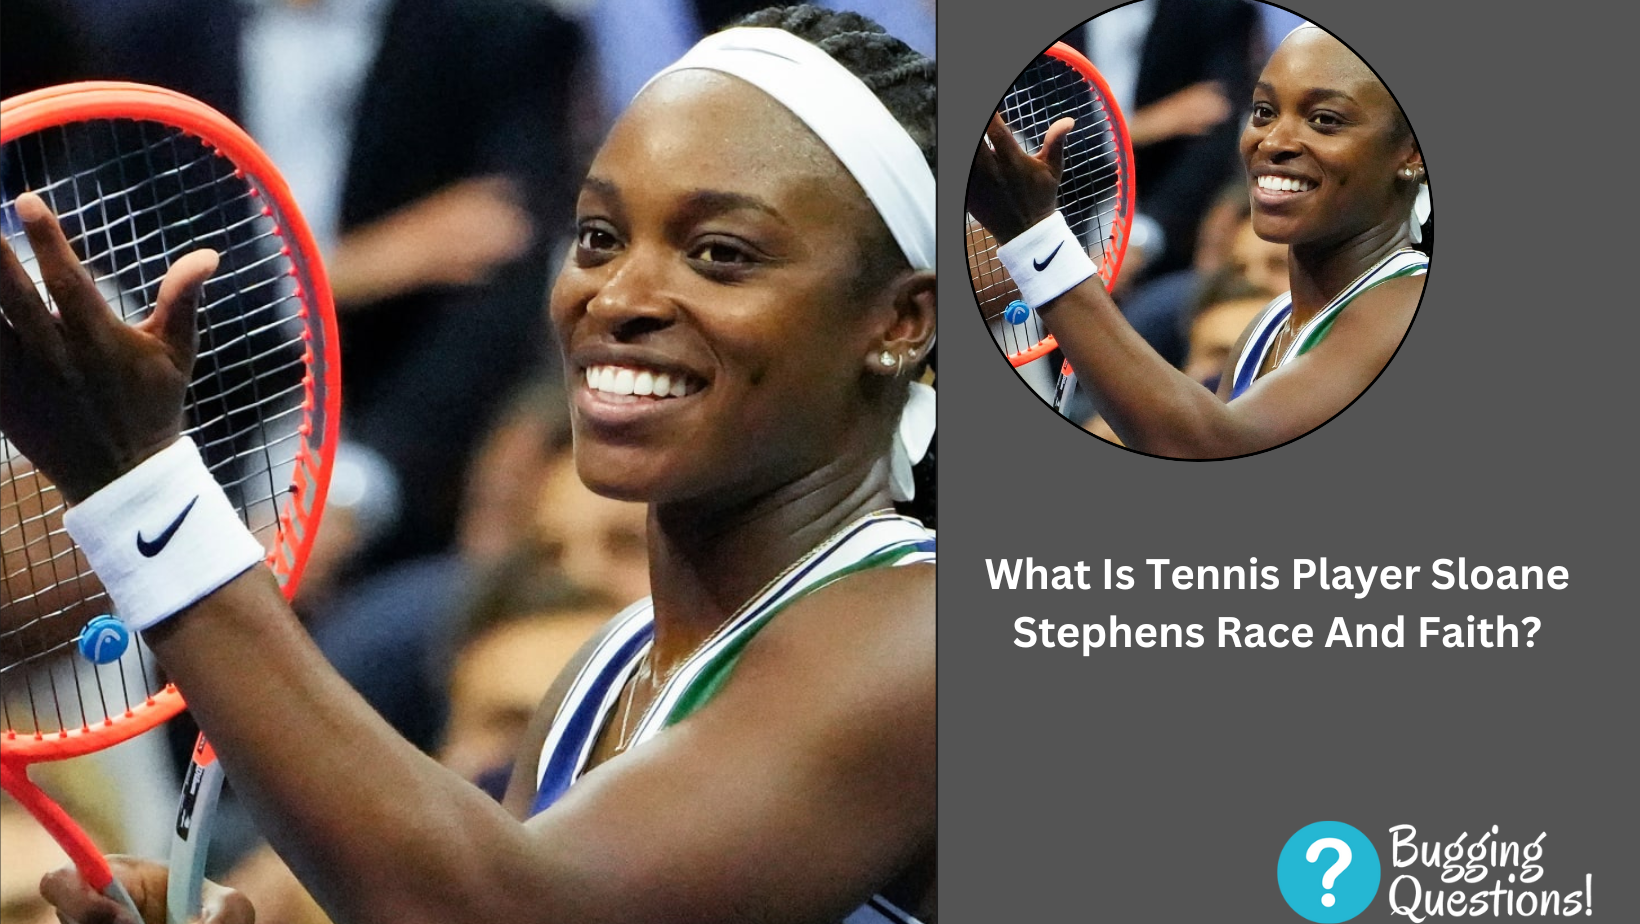 What Is Tennis Player Sloane Stephens Race And Faith?